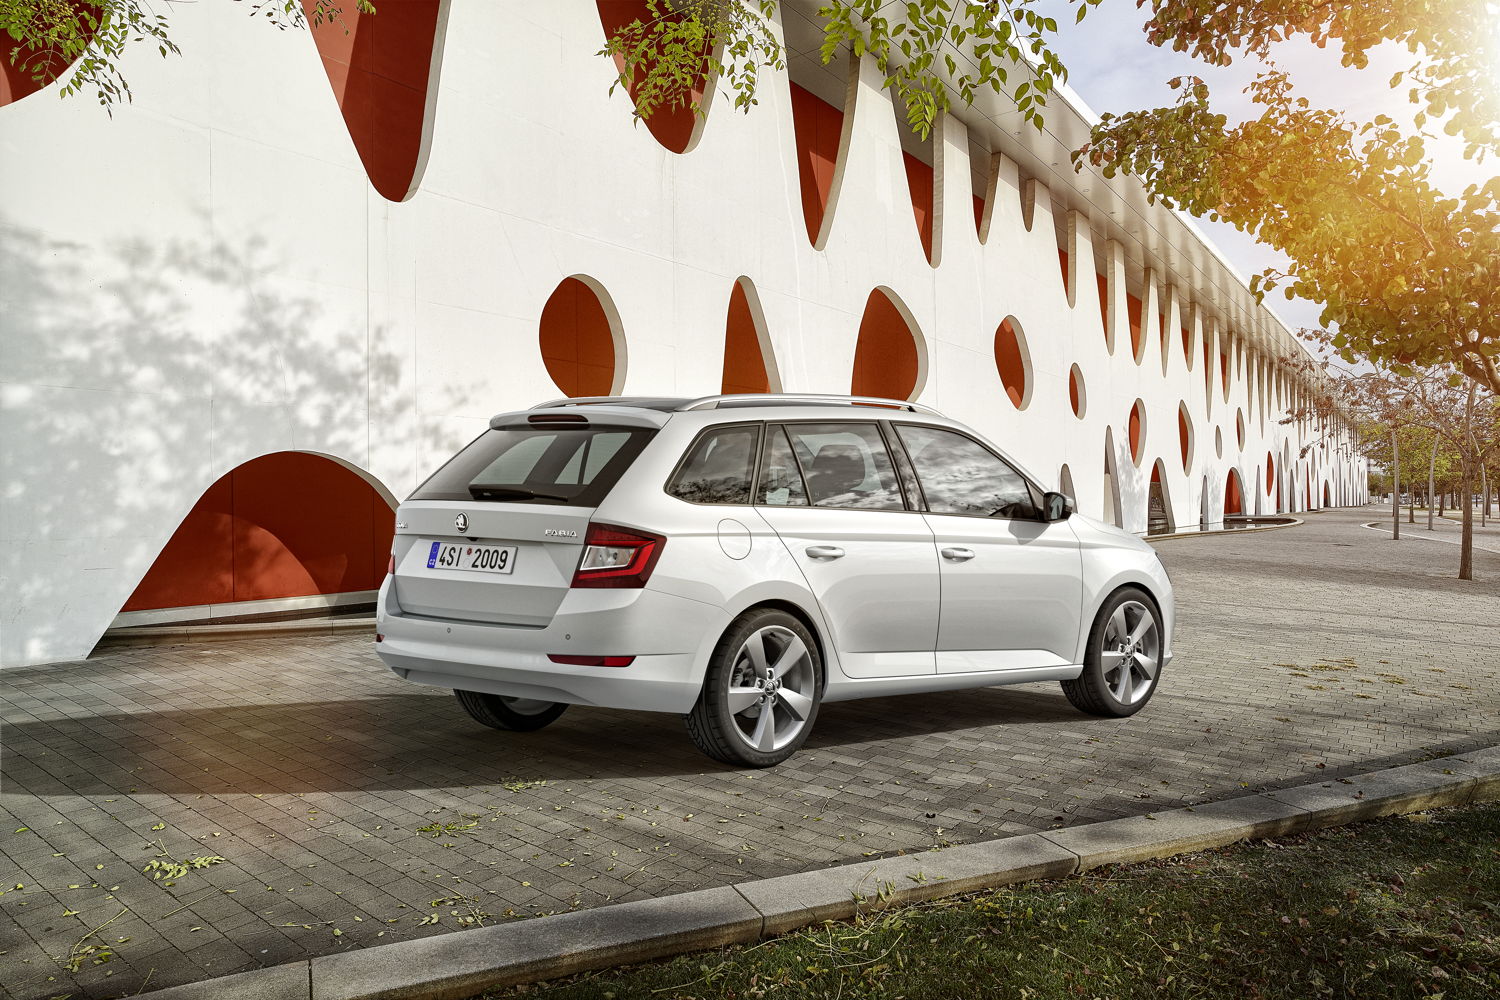 The modified design of the rear end and the LED lights give added emphasis to the mature, high-class character of the ŠKODA FABIA Estate.